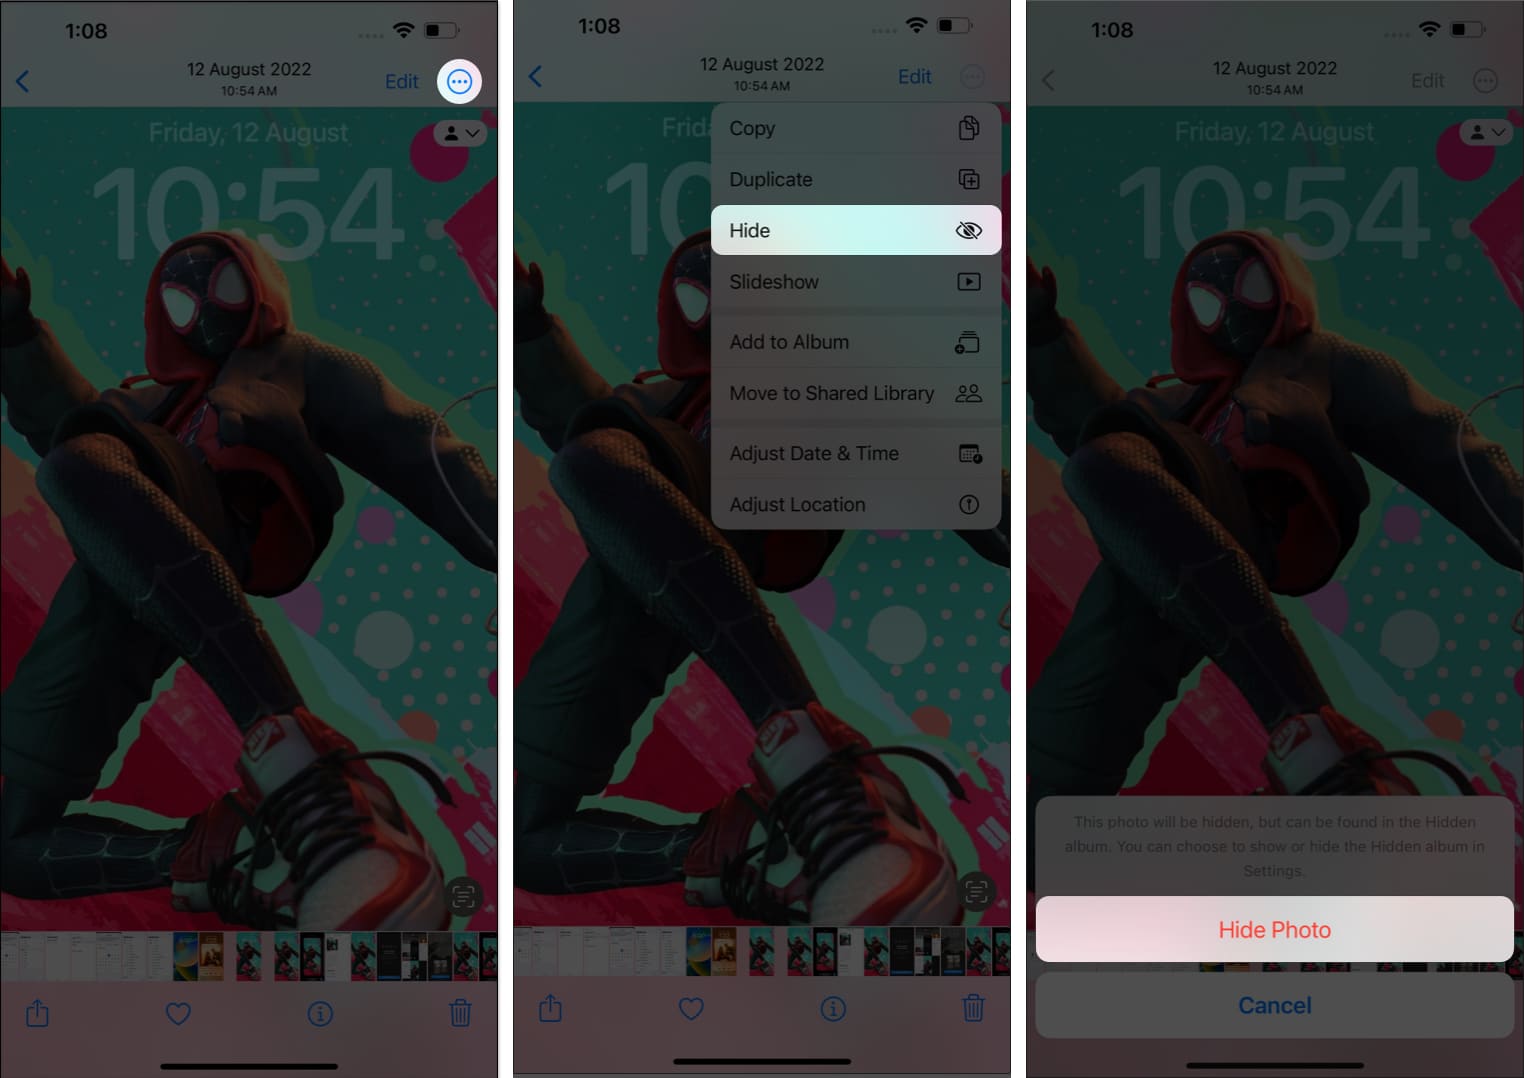 Tap the three-dot icon, hide photo, hide photo in photos app